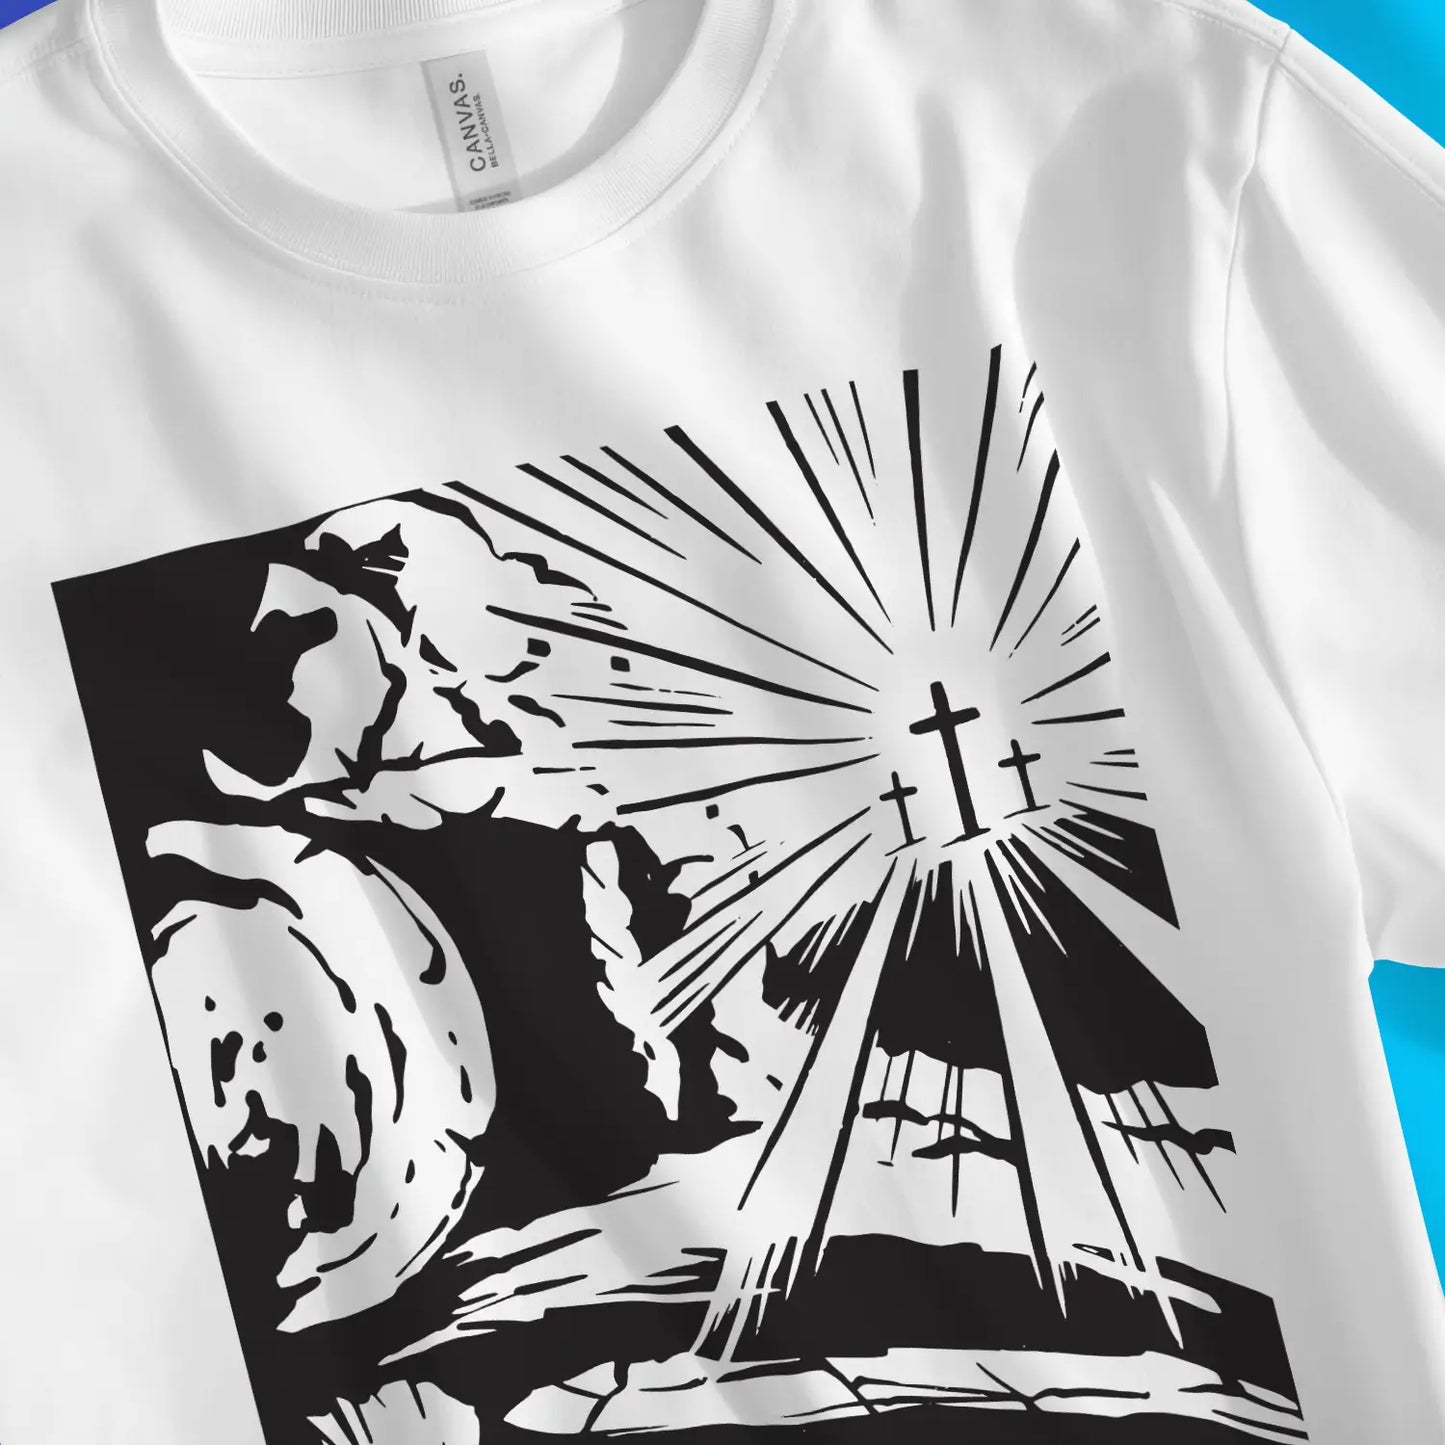 An image of Jesus' Death & Resurrection | Premium Unisex Christian T-shirt available at 3rd Day Christian Clothing UK